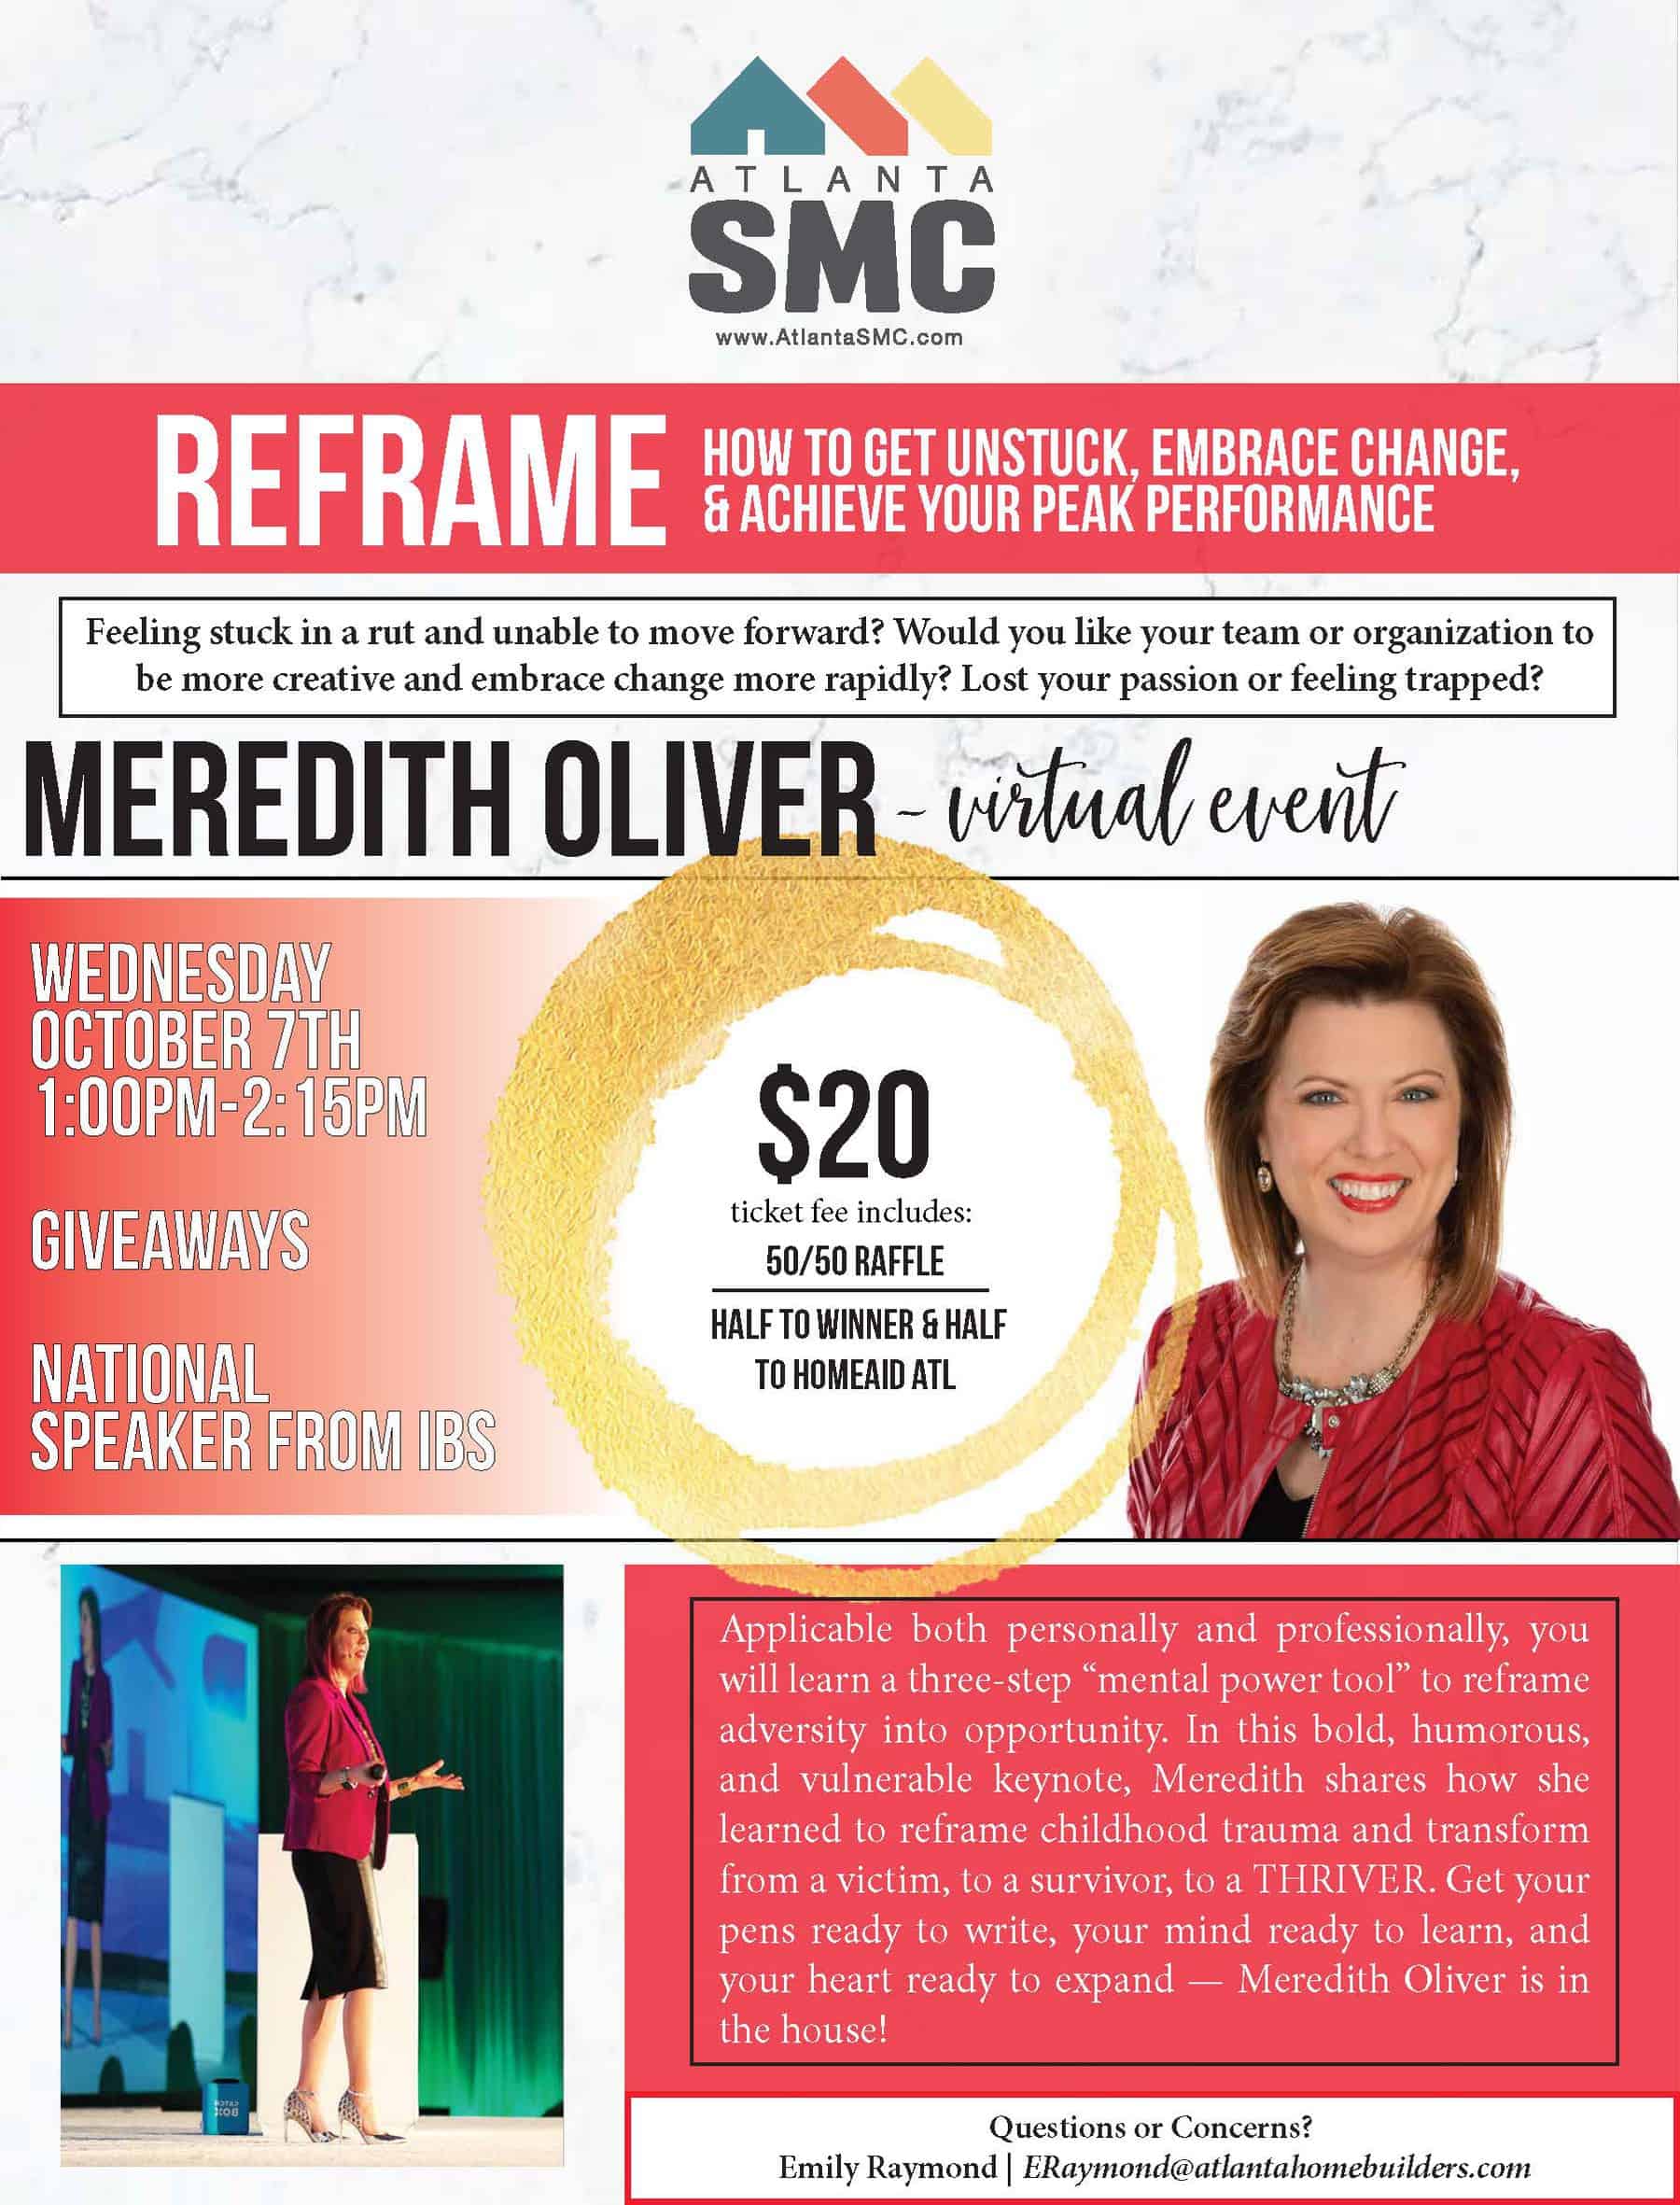 Atlanta SMC to Host Virtual October Program Meeting with Meredith Oliver